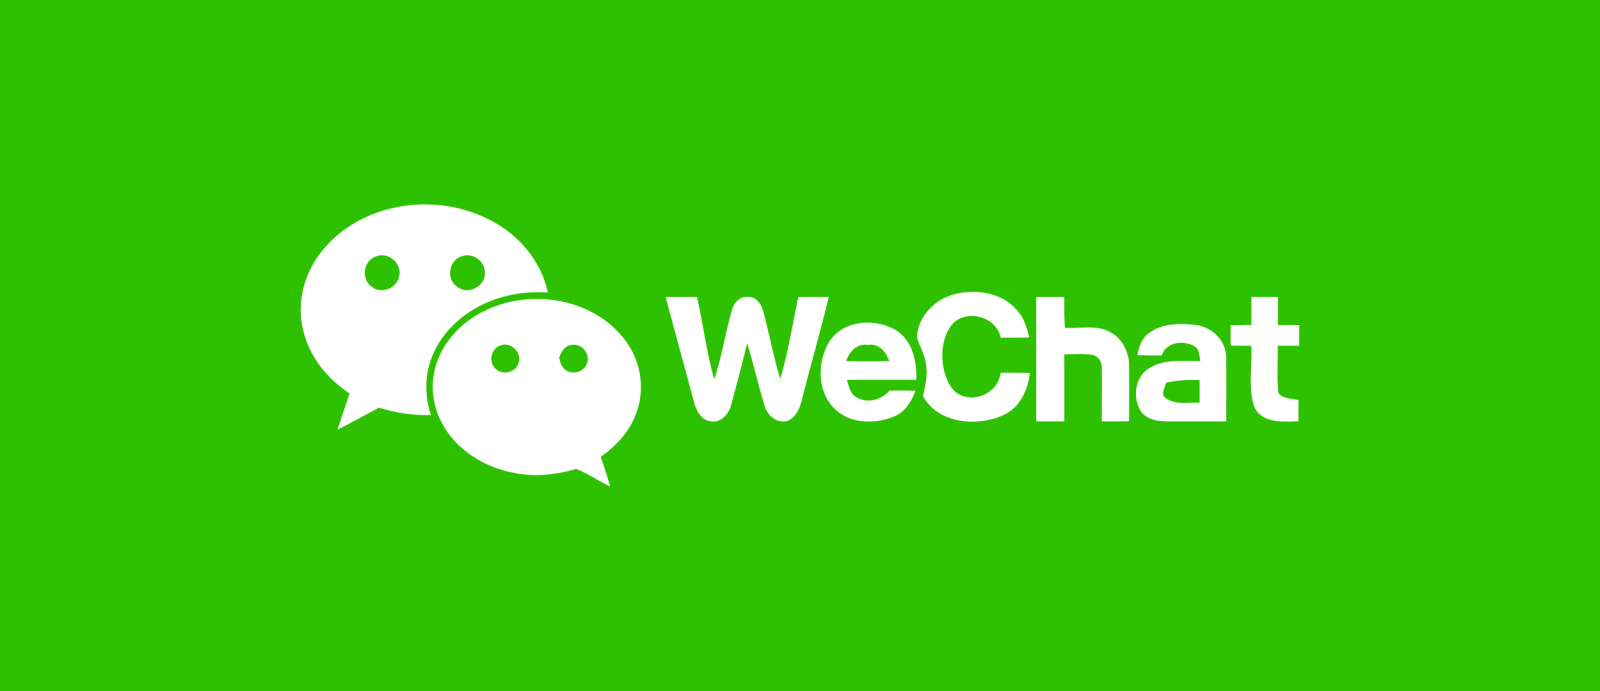 How a App Called Weixin Cracks The Social Media Code? How well do they really know their audience?